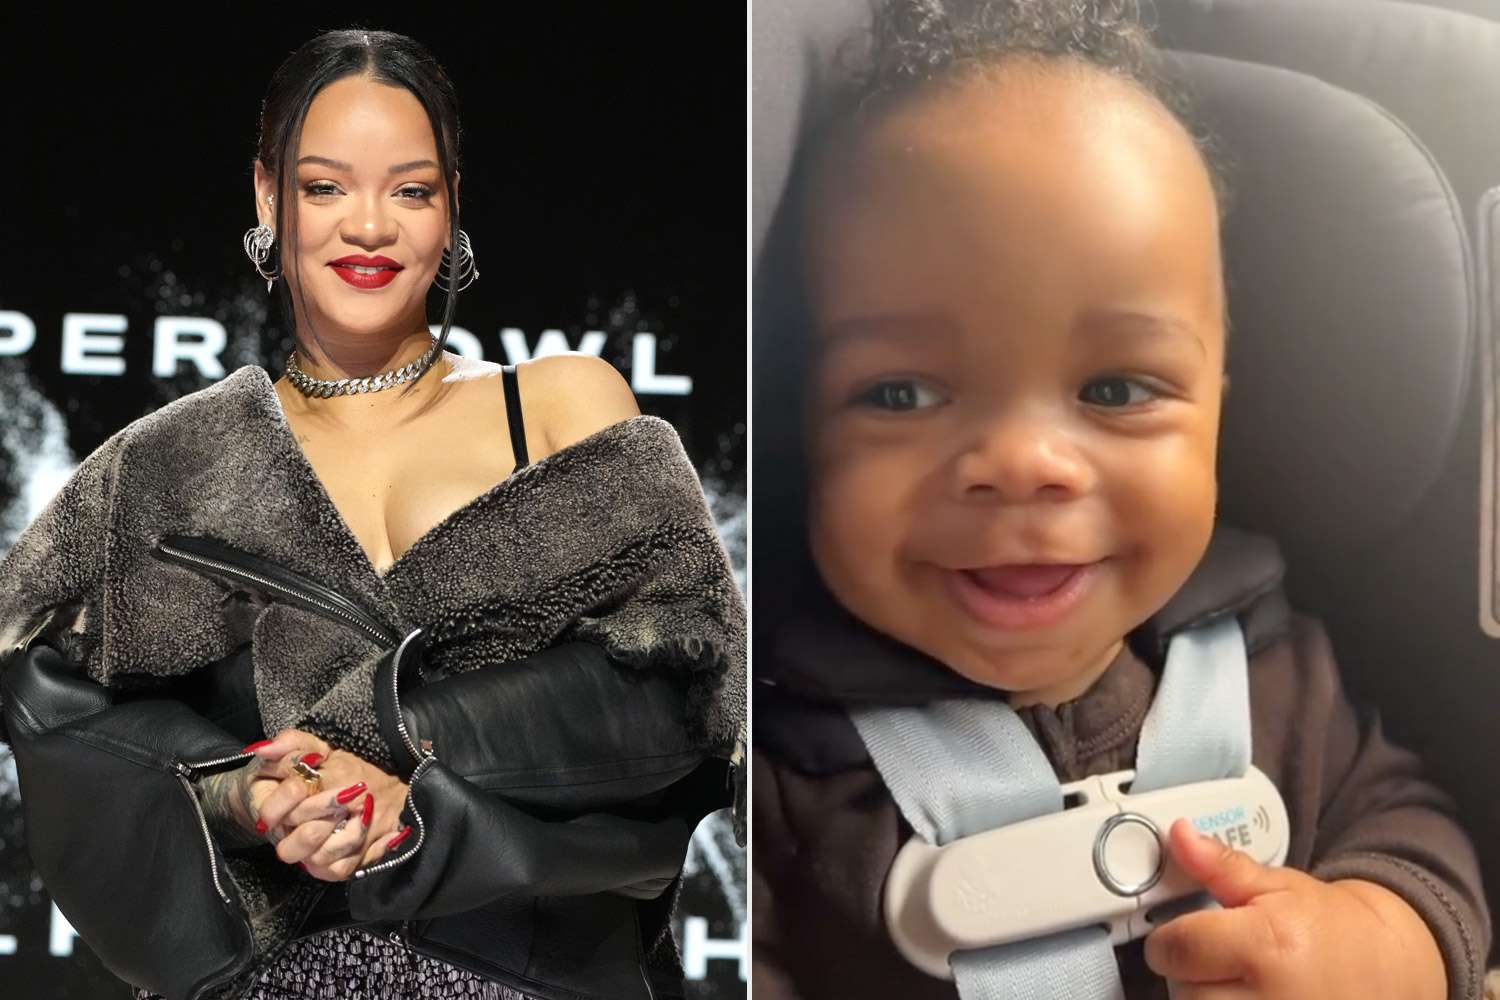 Rihanna on Life with Baby Son 'It Just Got Better with Him'